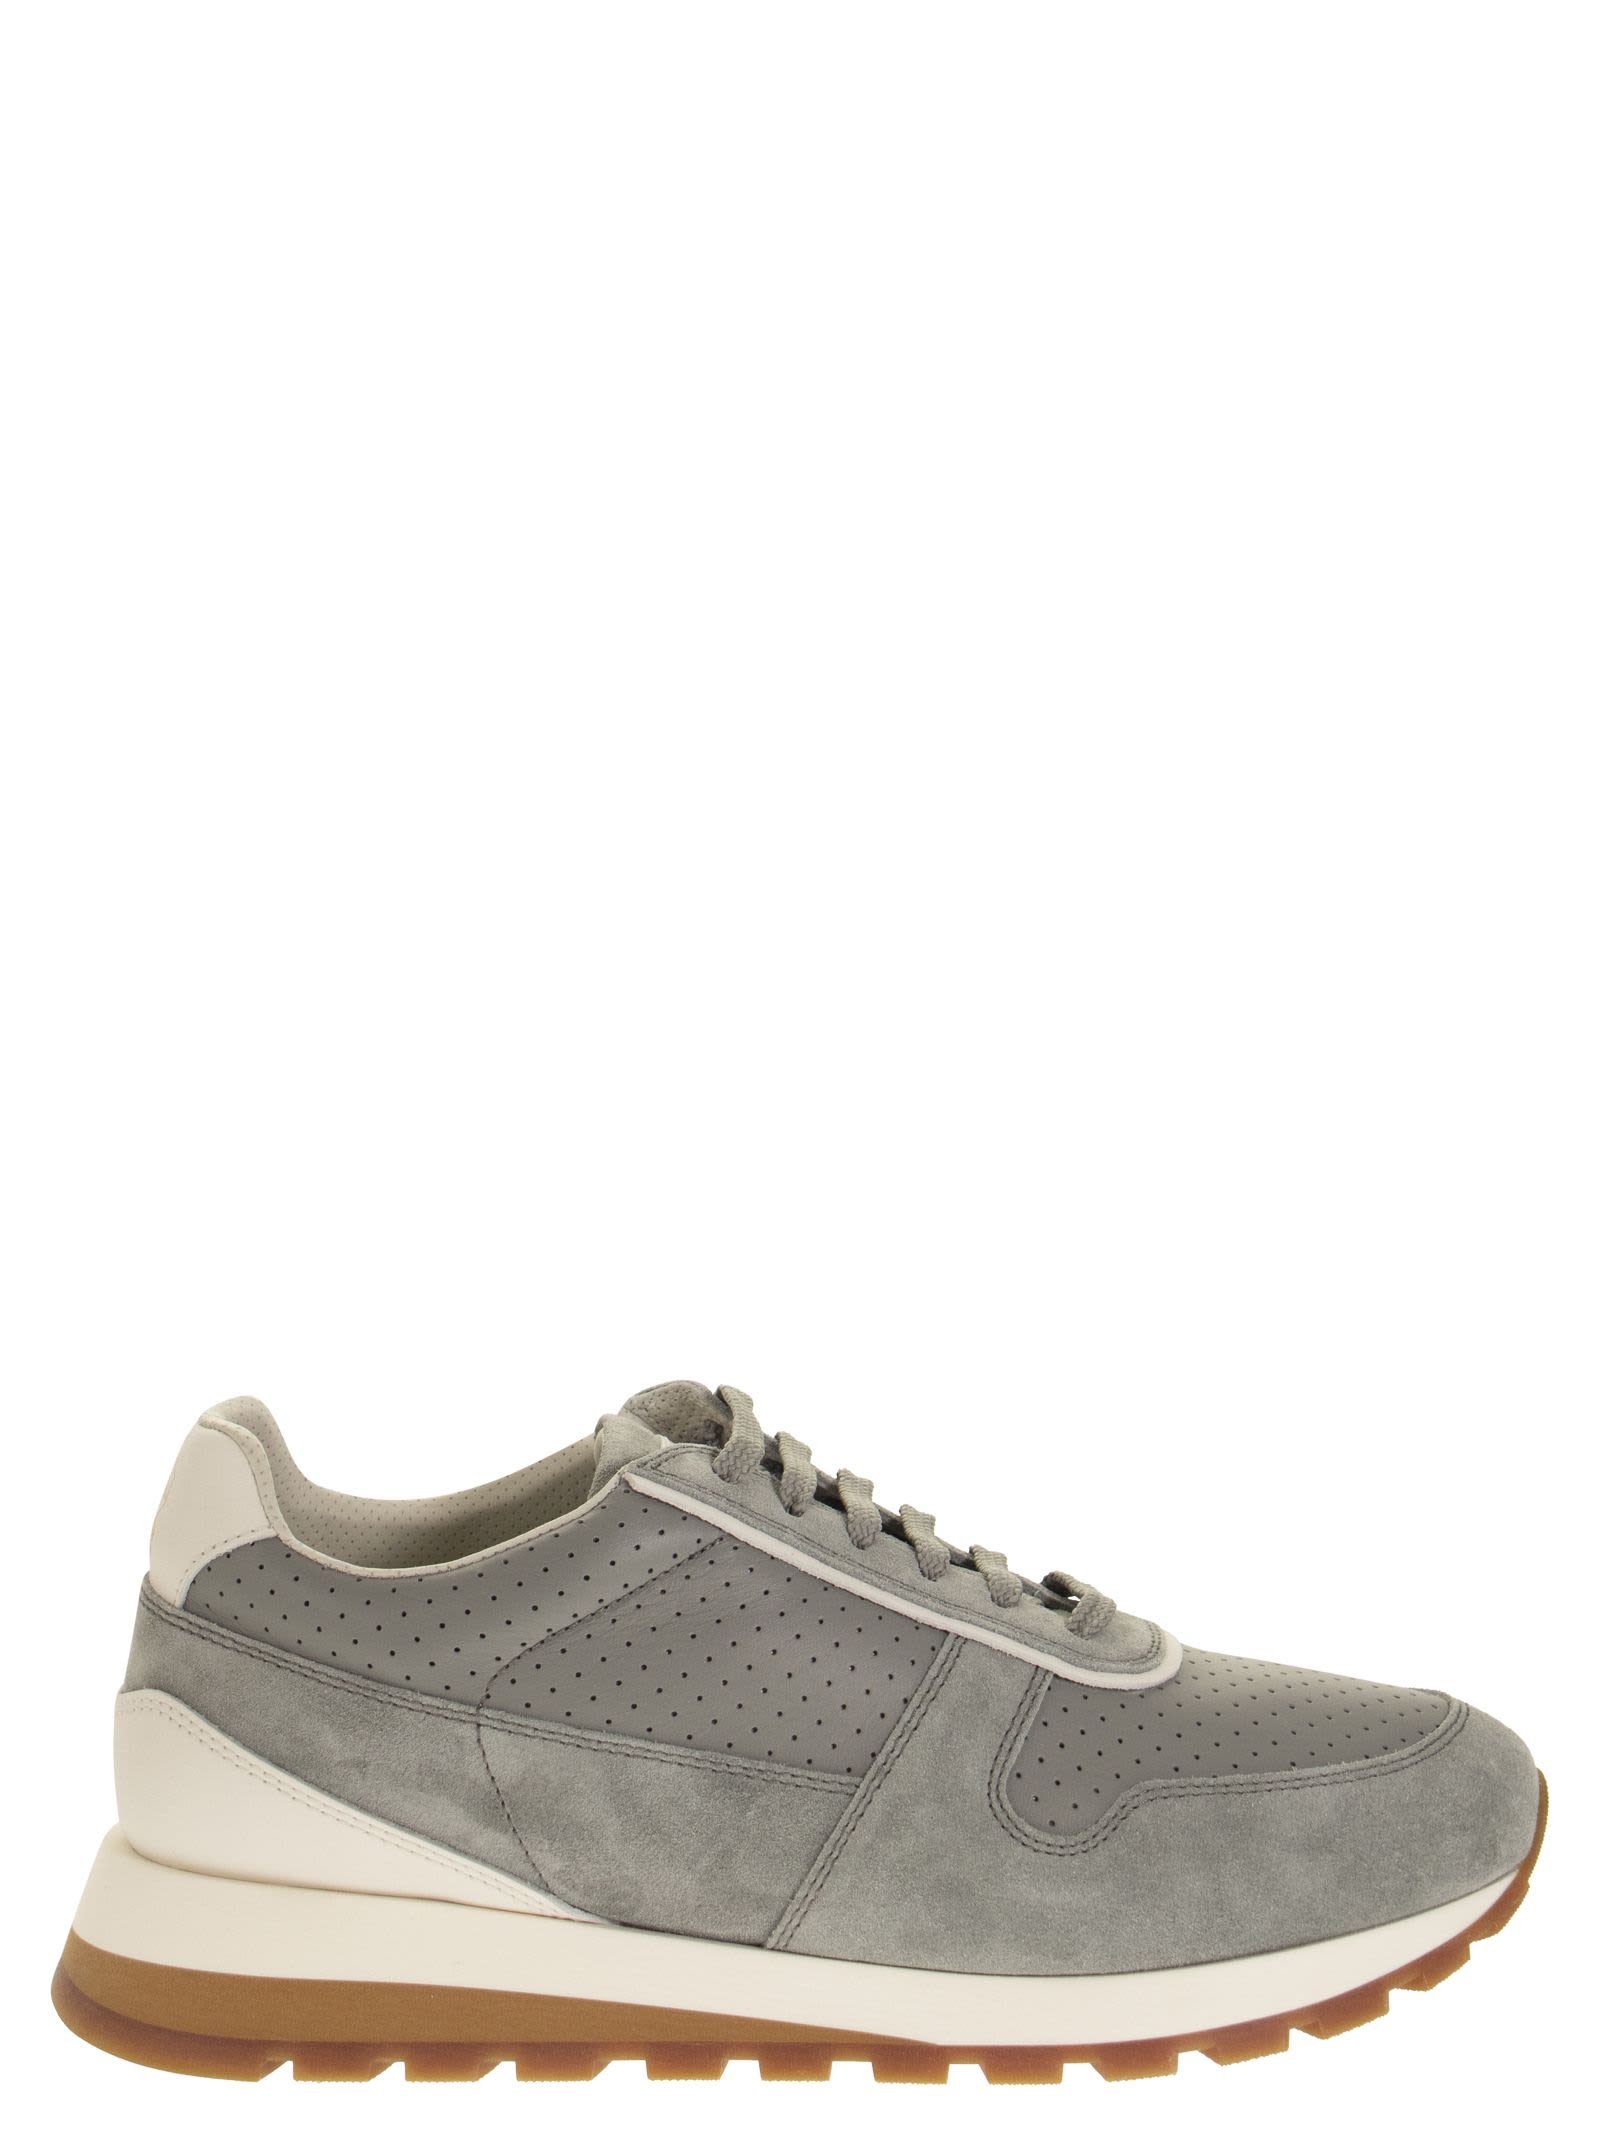 Brunello Cucinelli Suede And Leather Sneakers